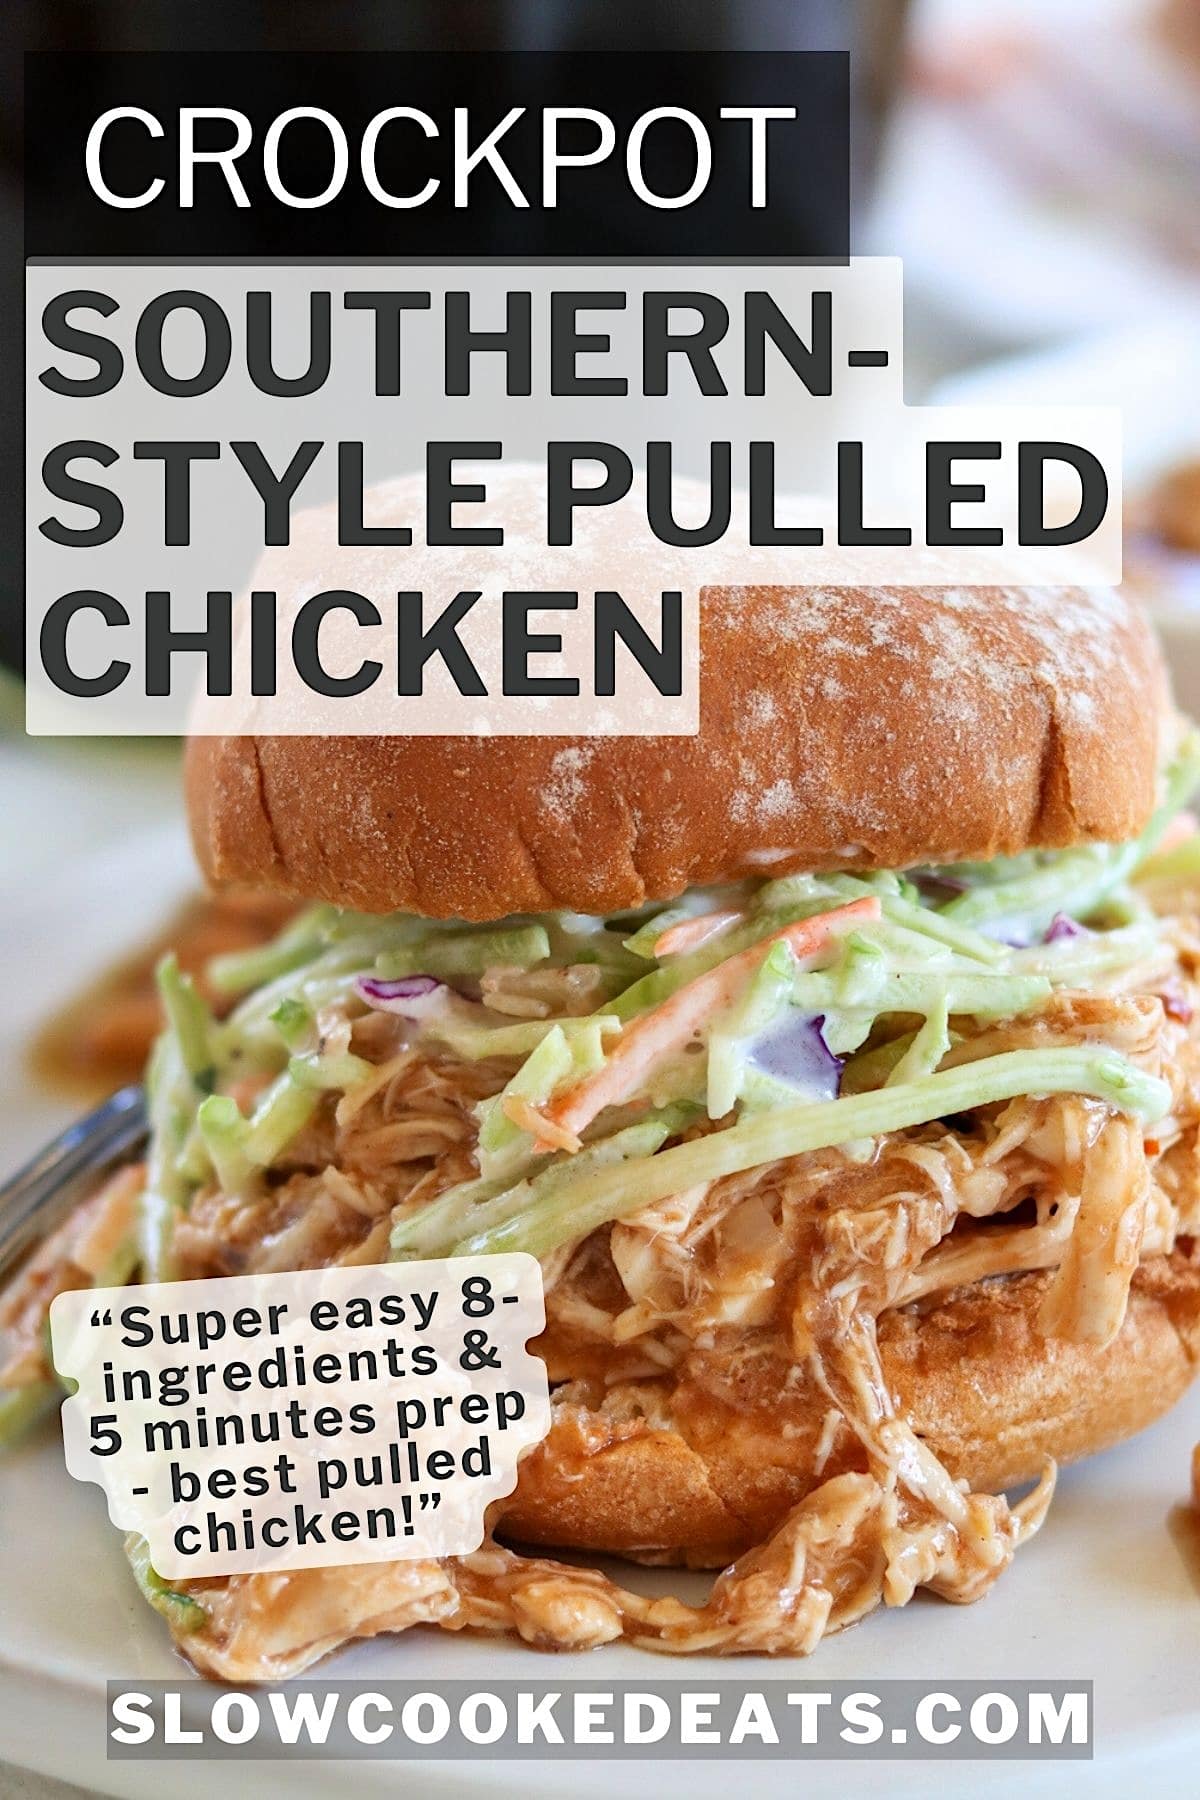 Southern pulled chicken crock pot recipe served on a bun with coleslaw.